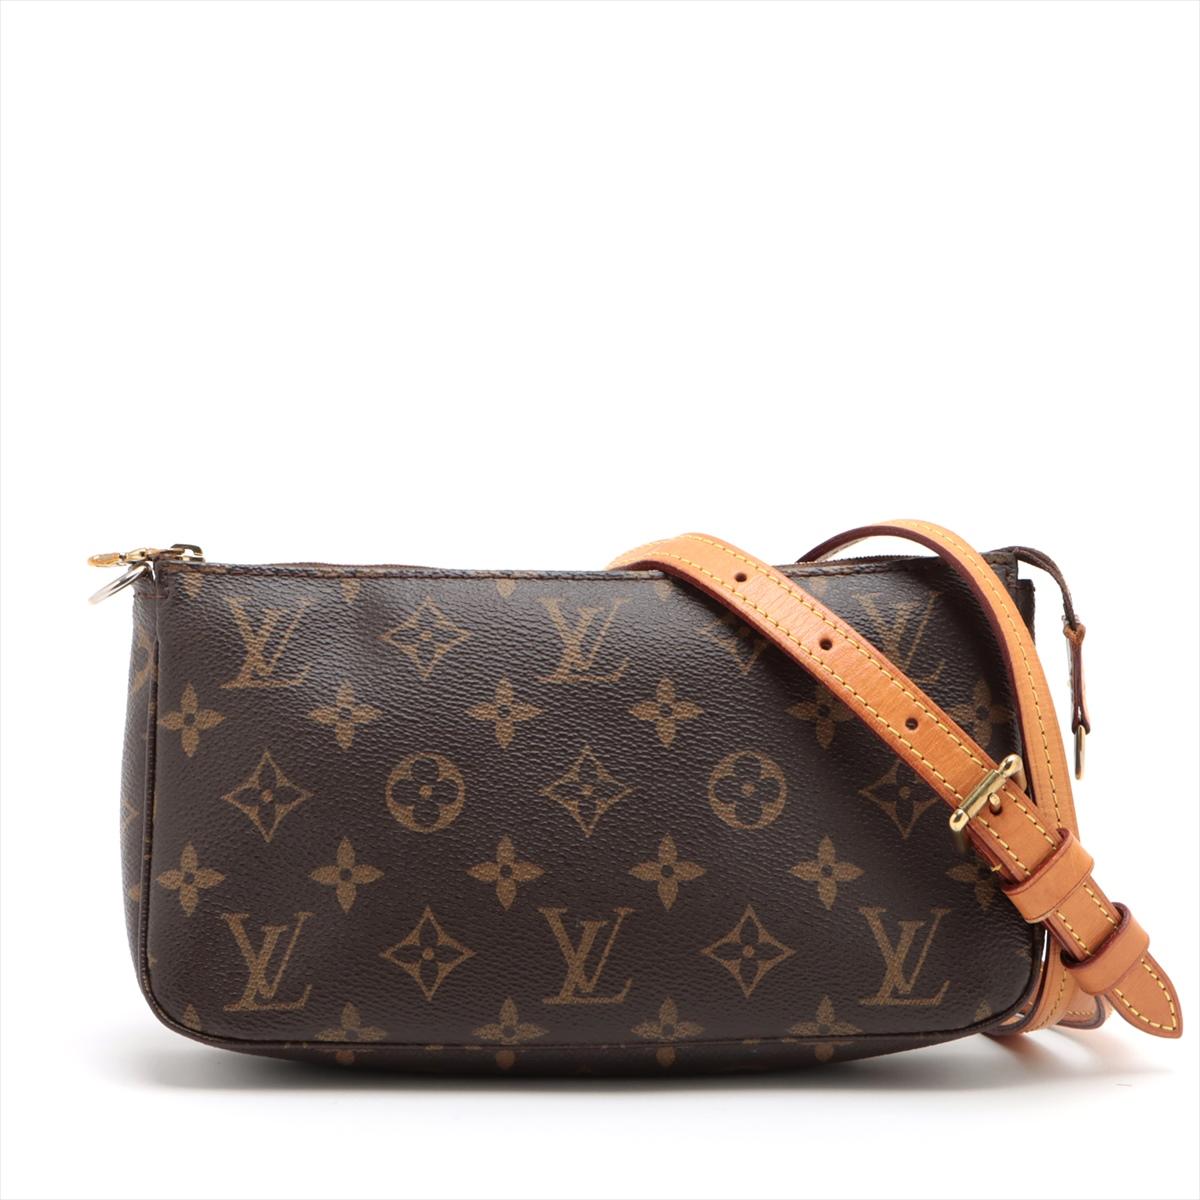 The Louis Vuitton Monogram Pochette Accessoires with a strap is a versatile and iconic accessory that blends fashion with functionality. Crafted from Louis Vuitton's signature Monogram canvas. The bag is a compact and elegant pouch that can be worn